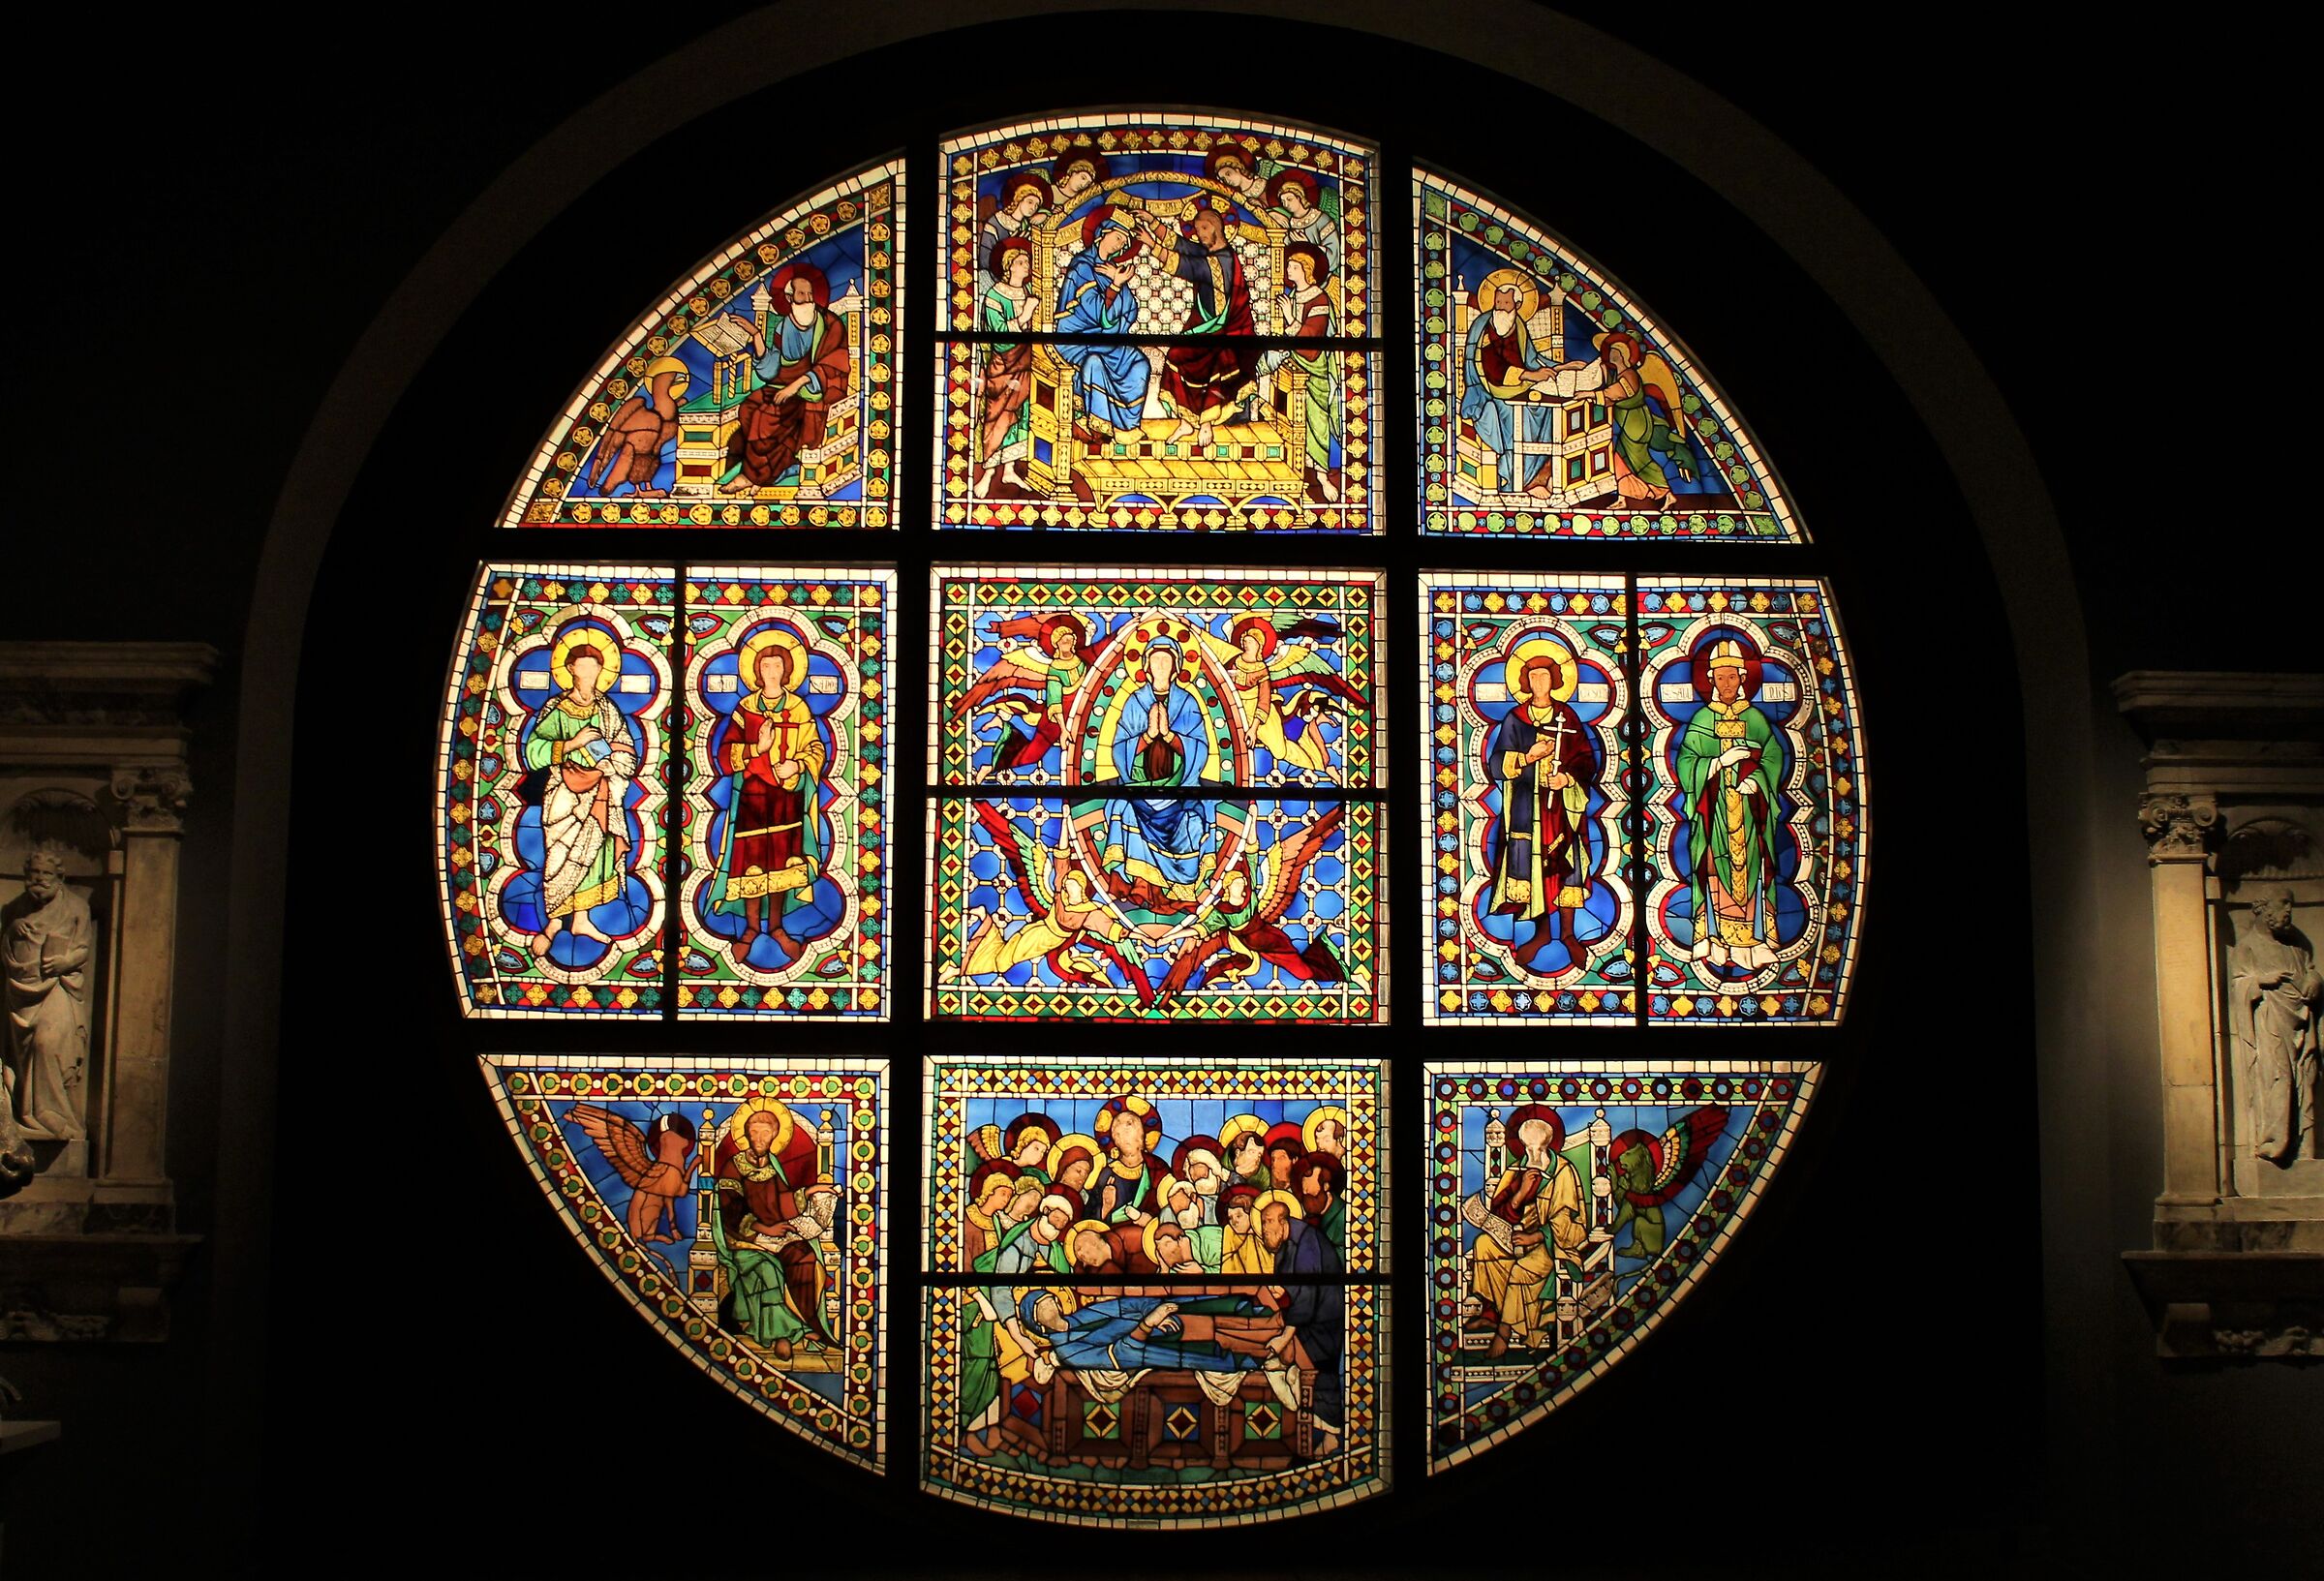 The Stained Glass window of the Duccio...